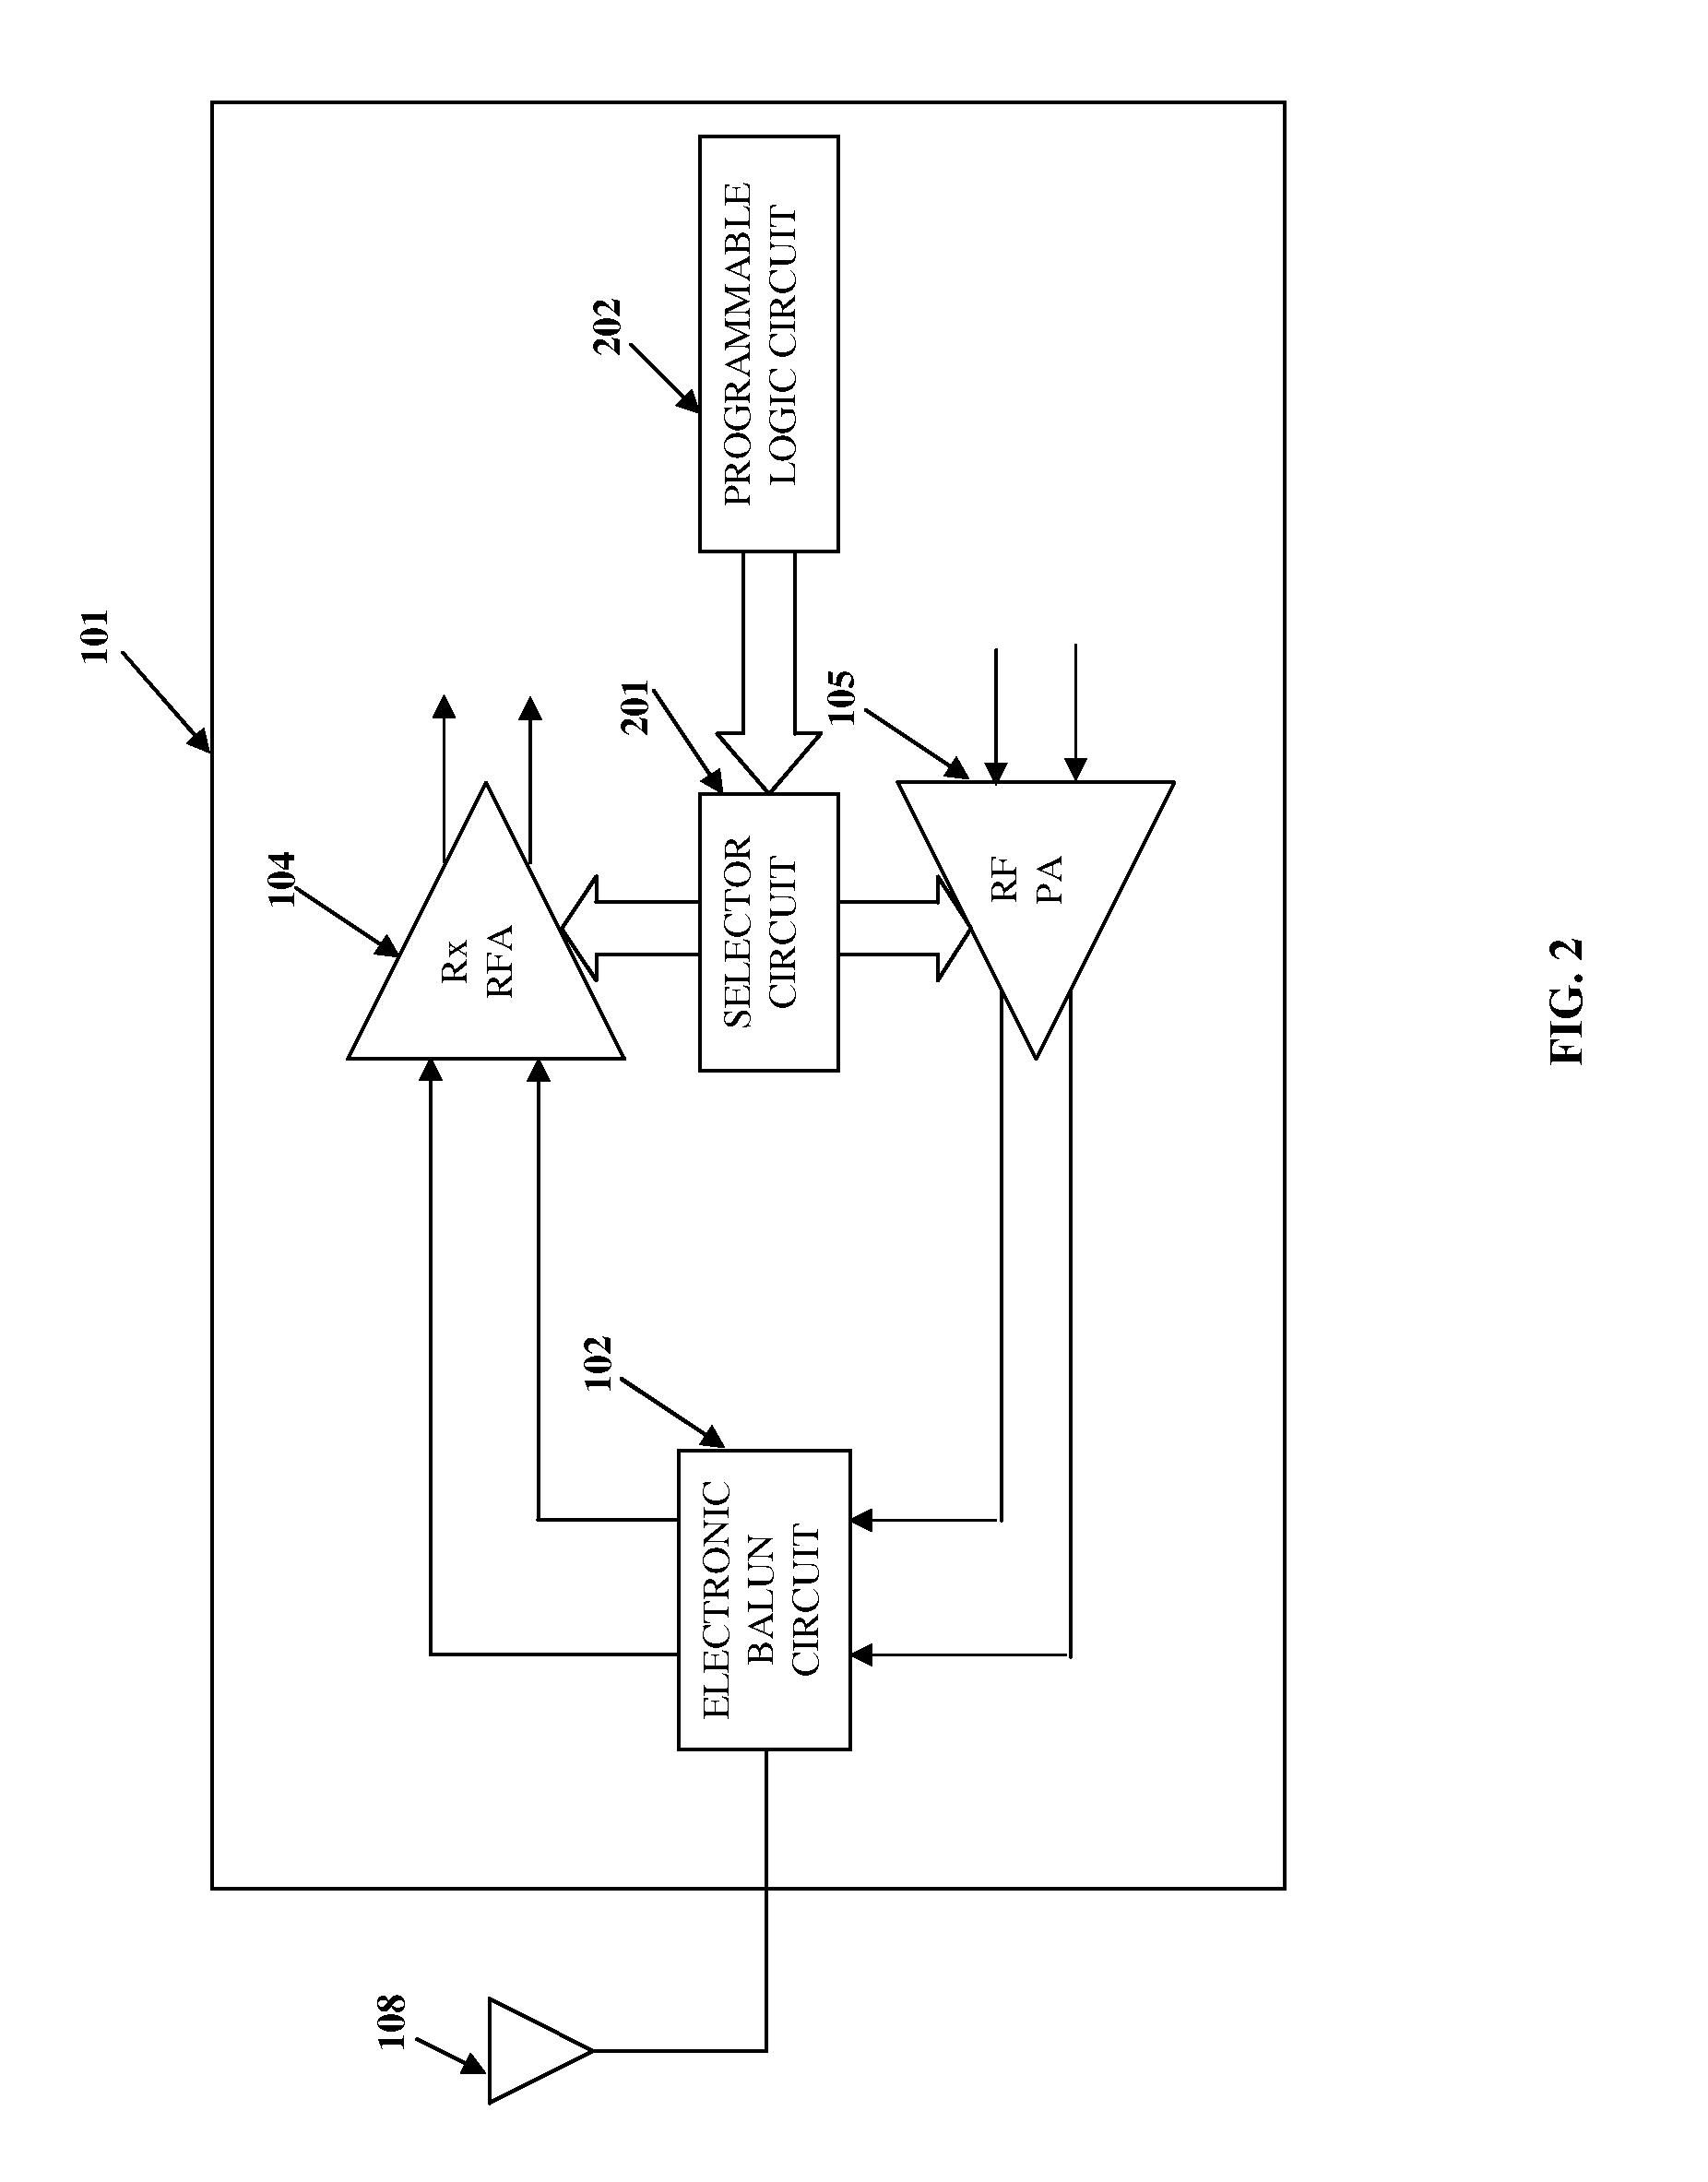 Integrated Radio Frequency Front-end Circuit